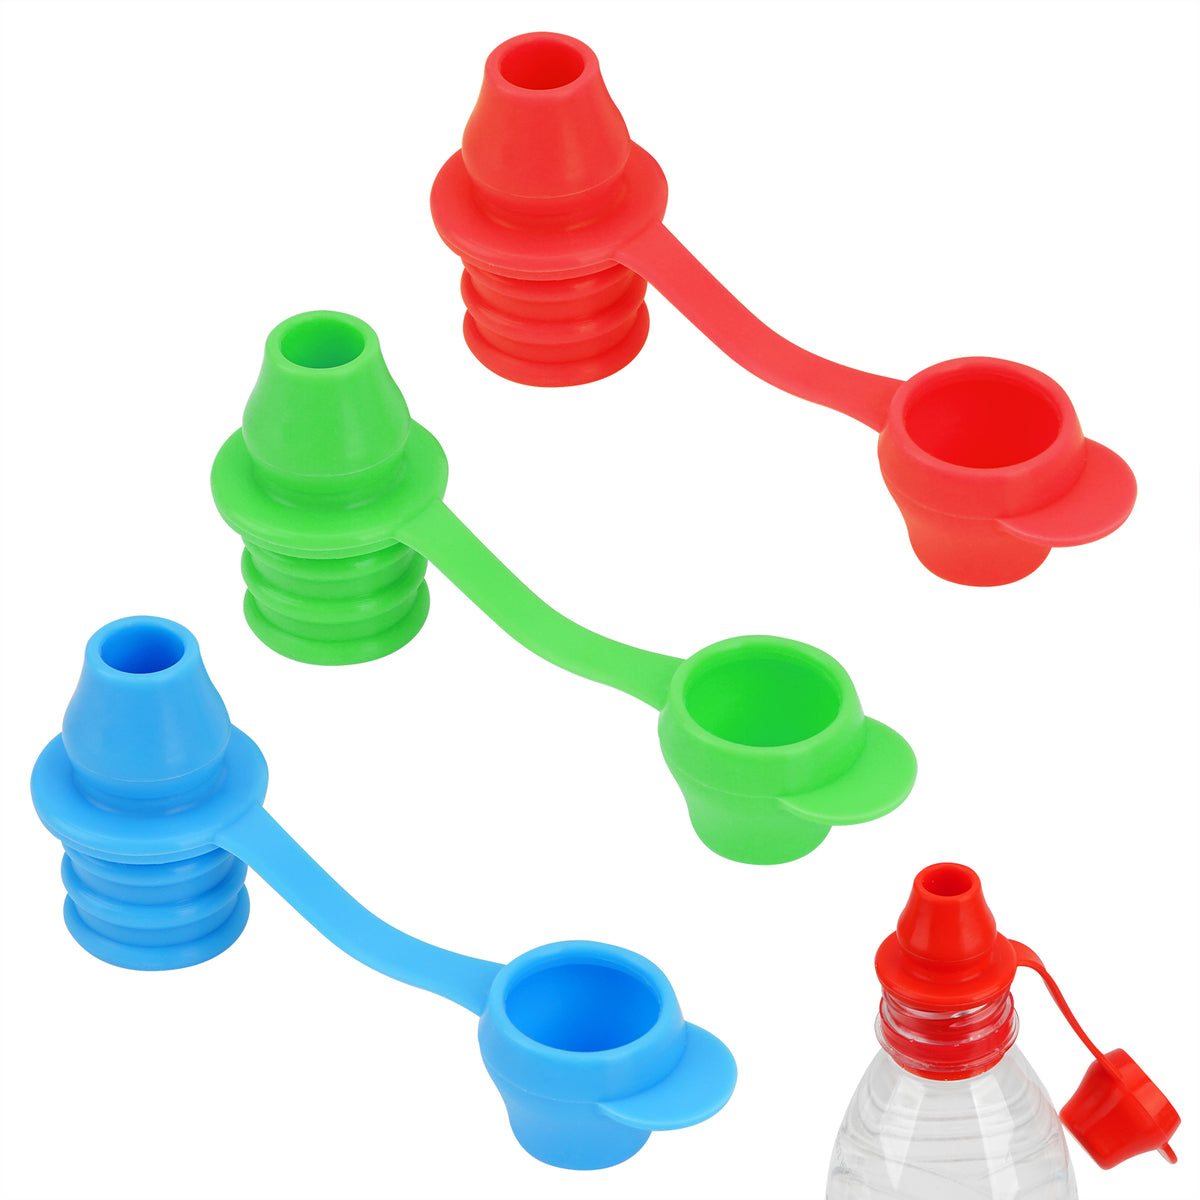 Adorila 3 Pack Silicone Bottles Top Spout, Water Bottle Spout Adapter Replacement for Kids and Adults, No Spill Water Bottle Cap